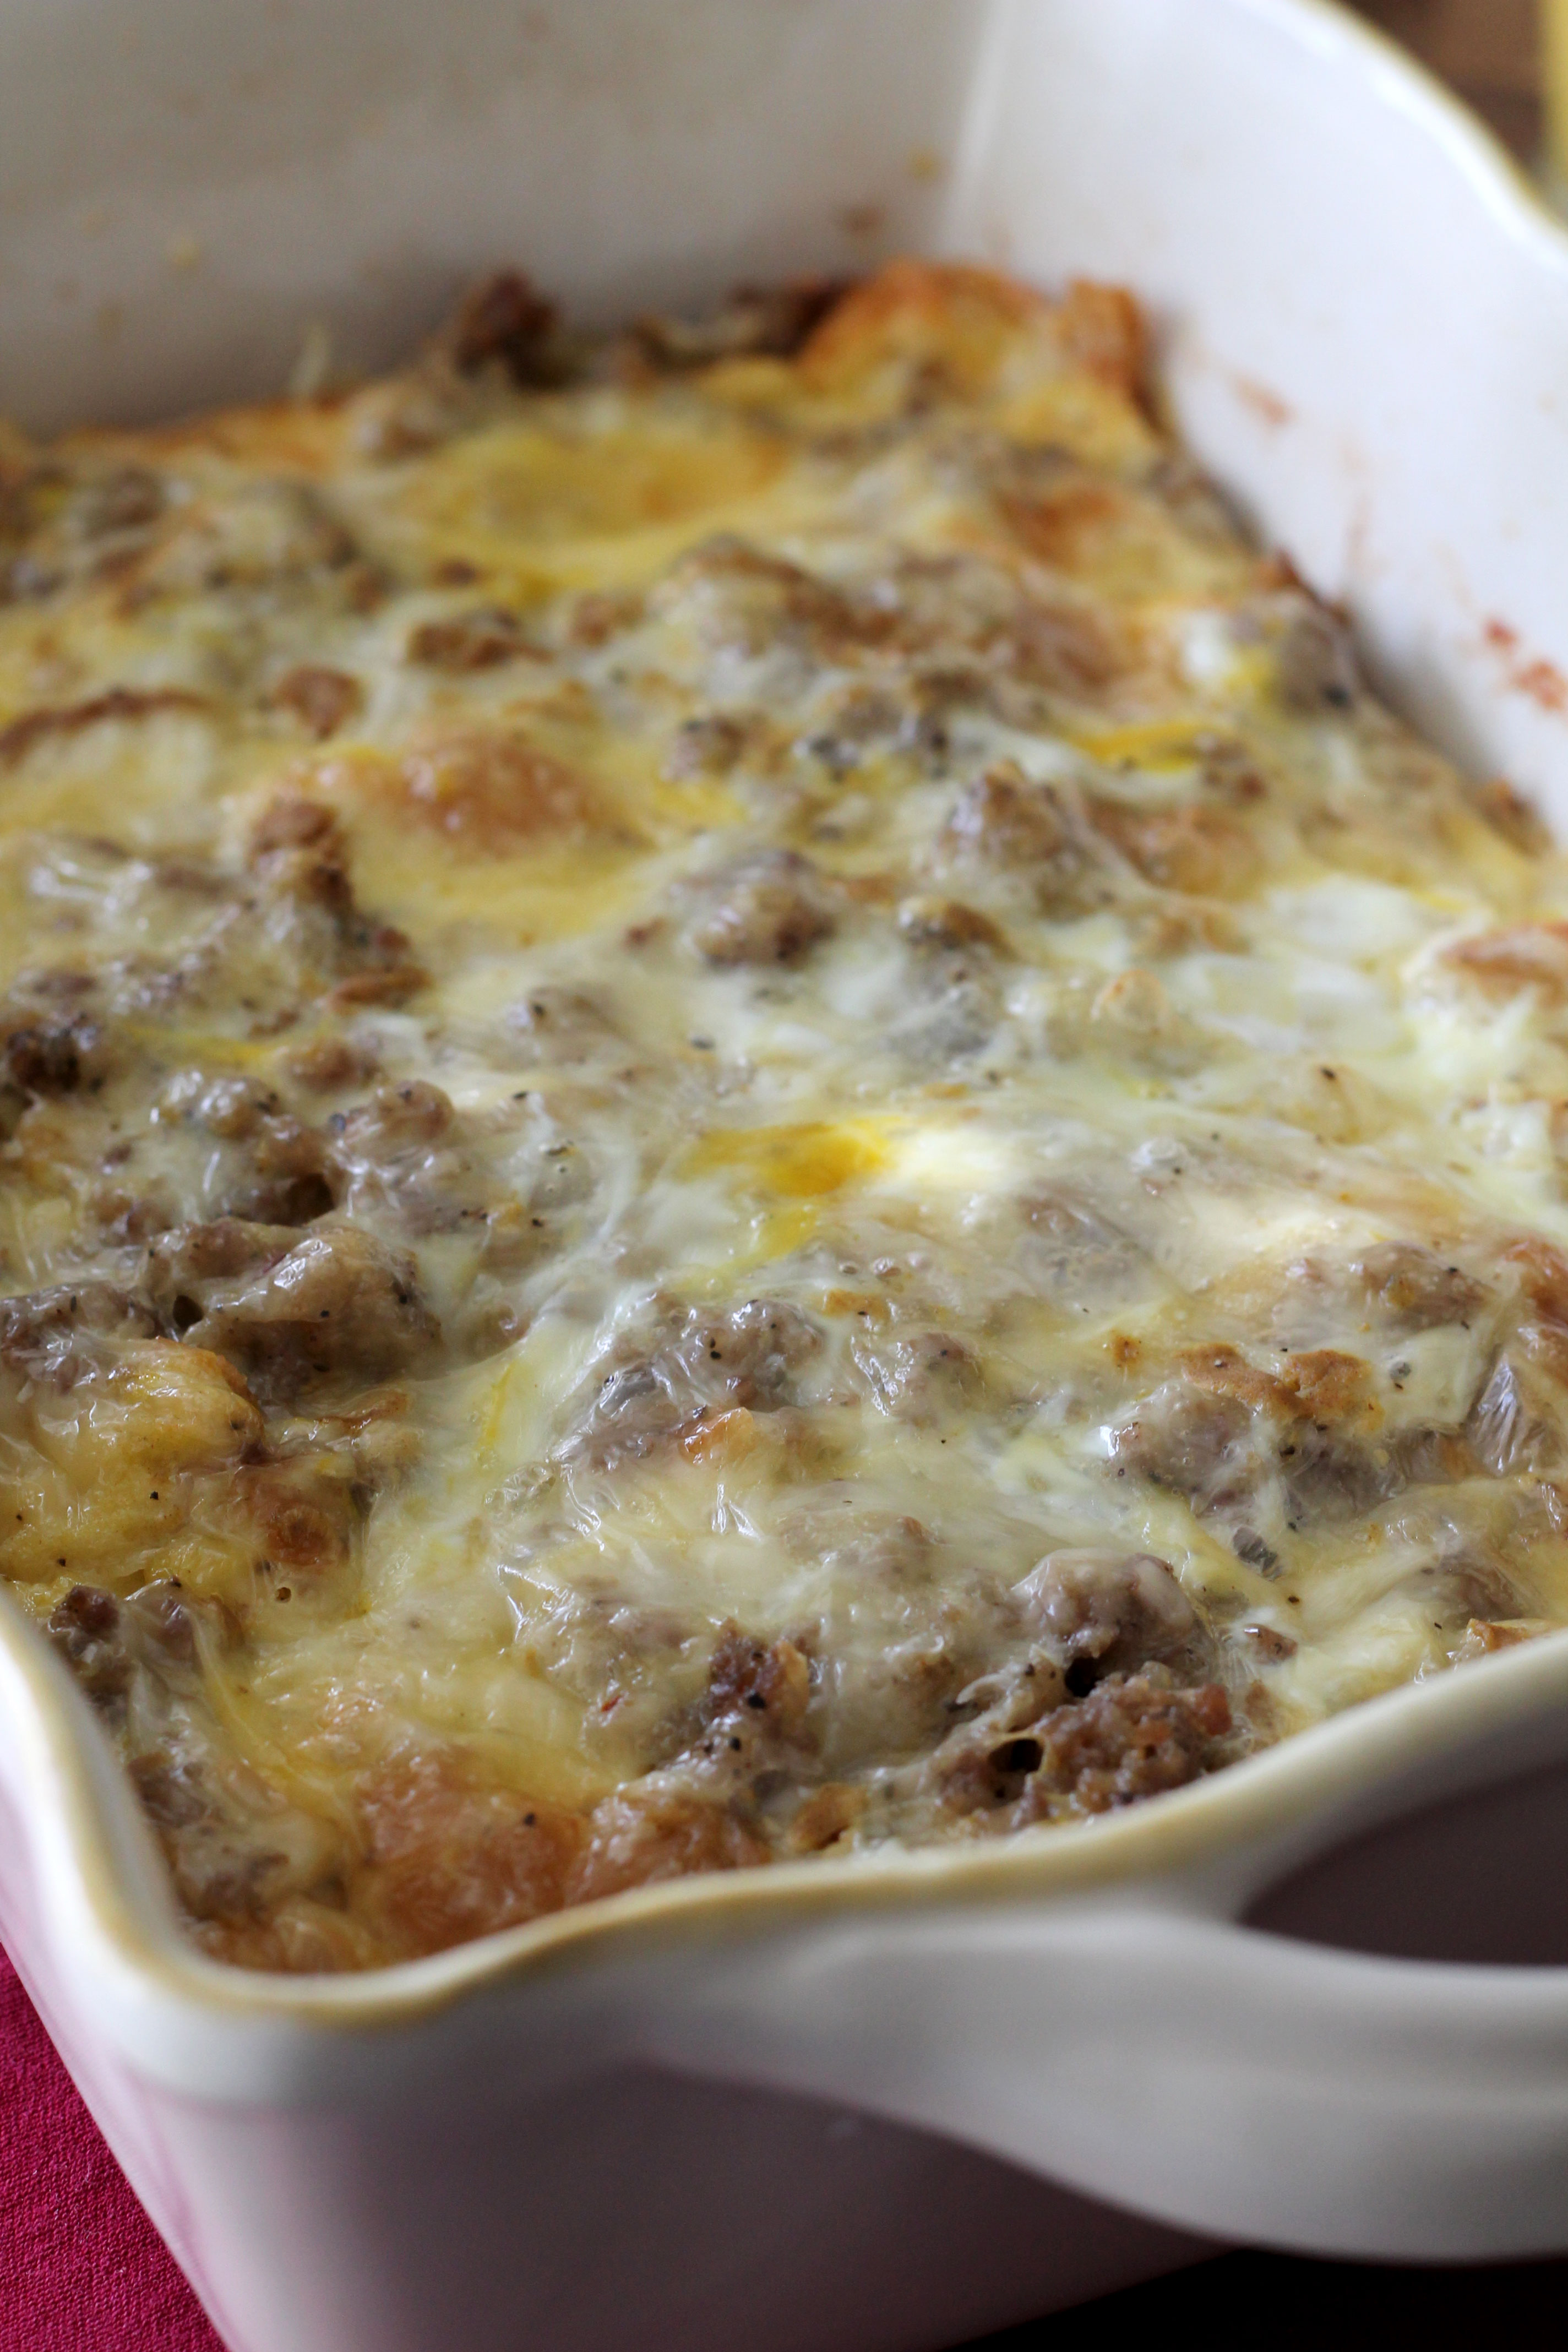 Overnight Breakfast Casserole - Make this ahead of time and just pop in the oven in the morning. Warm, cheesy and delicious!